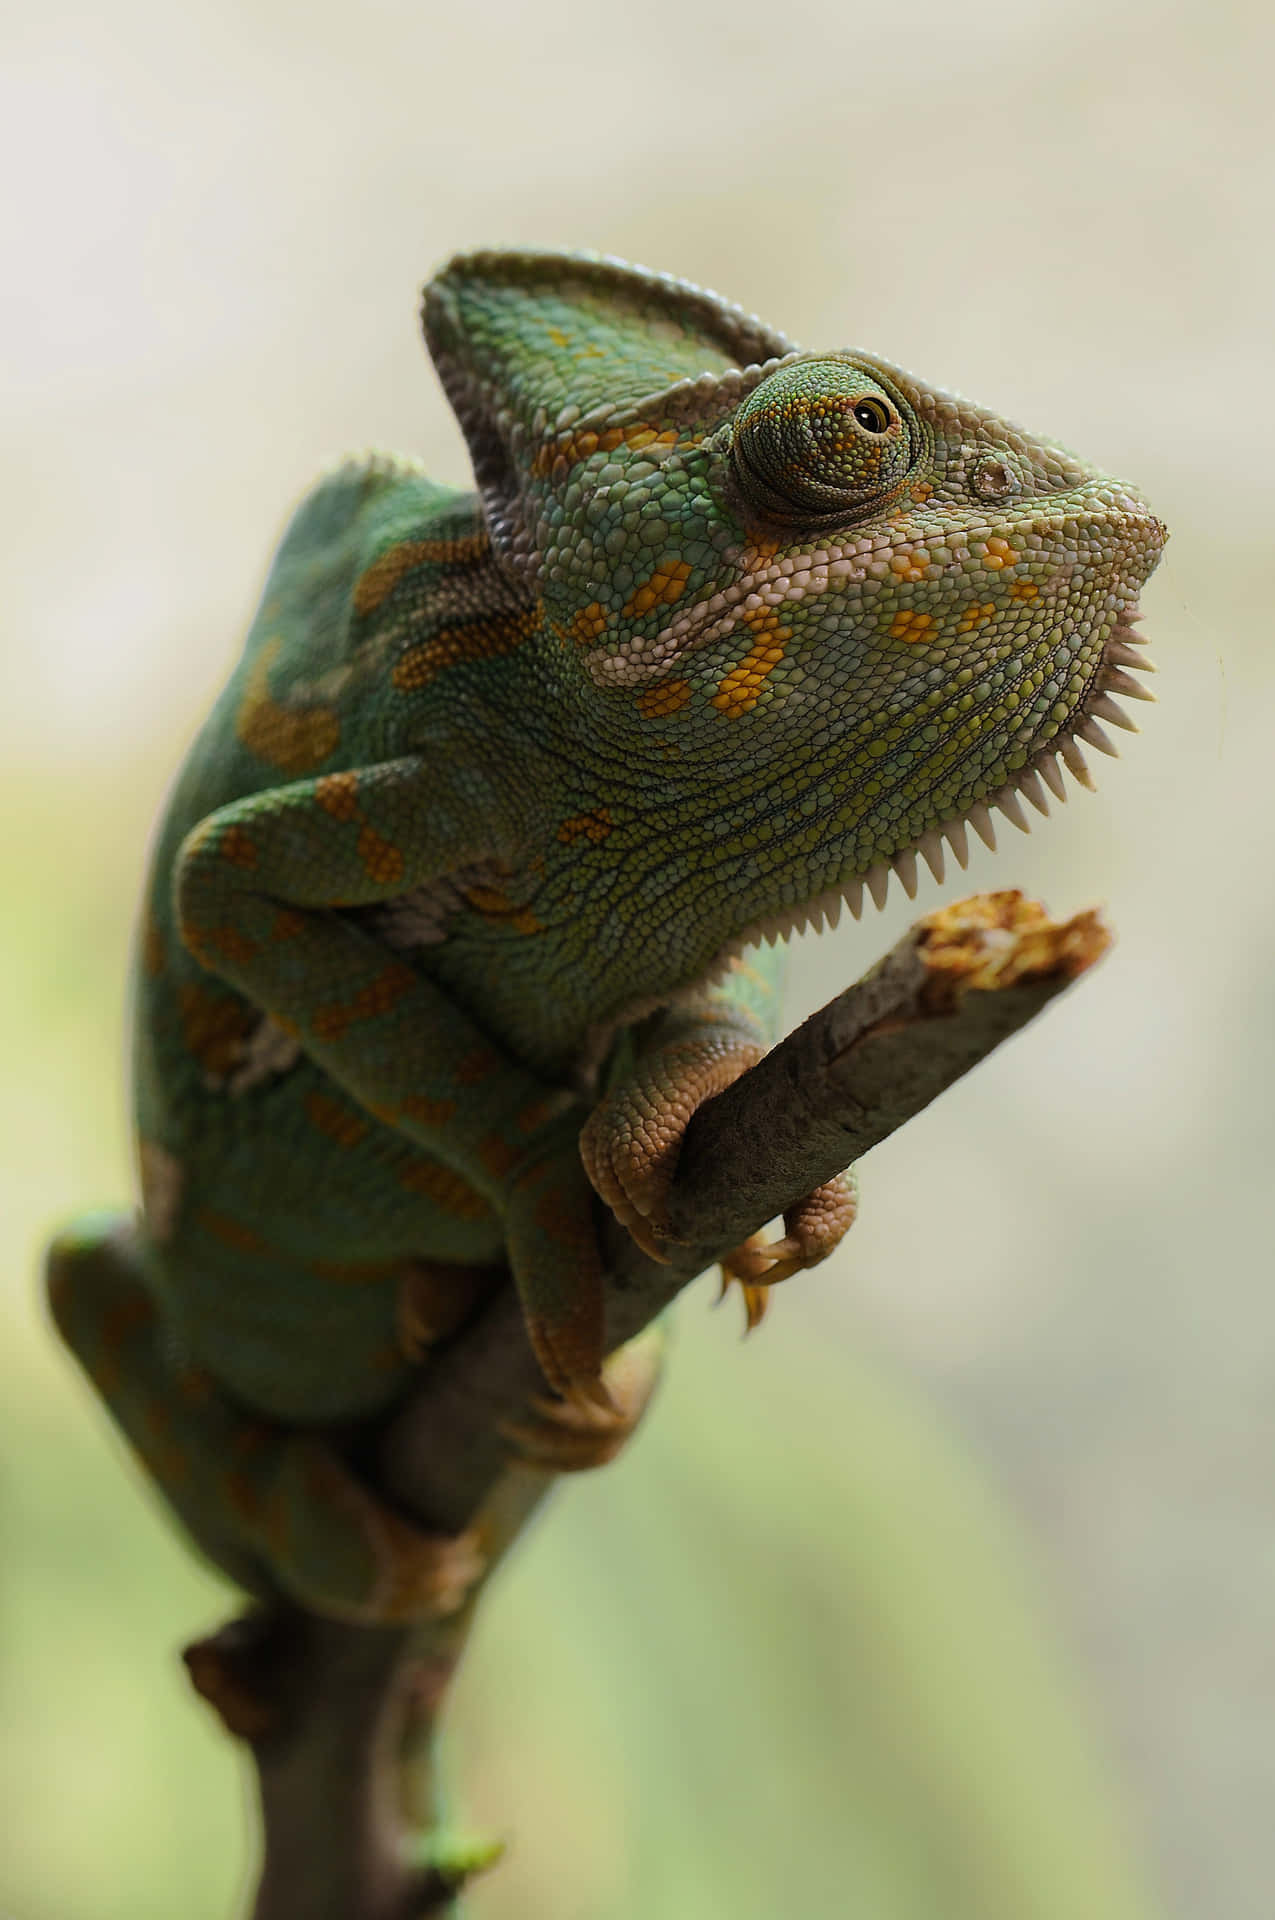 A Chameleon Is Sitting On A Branch